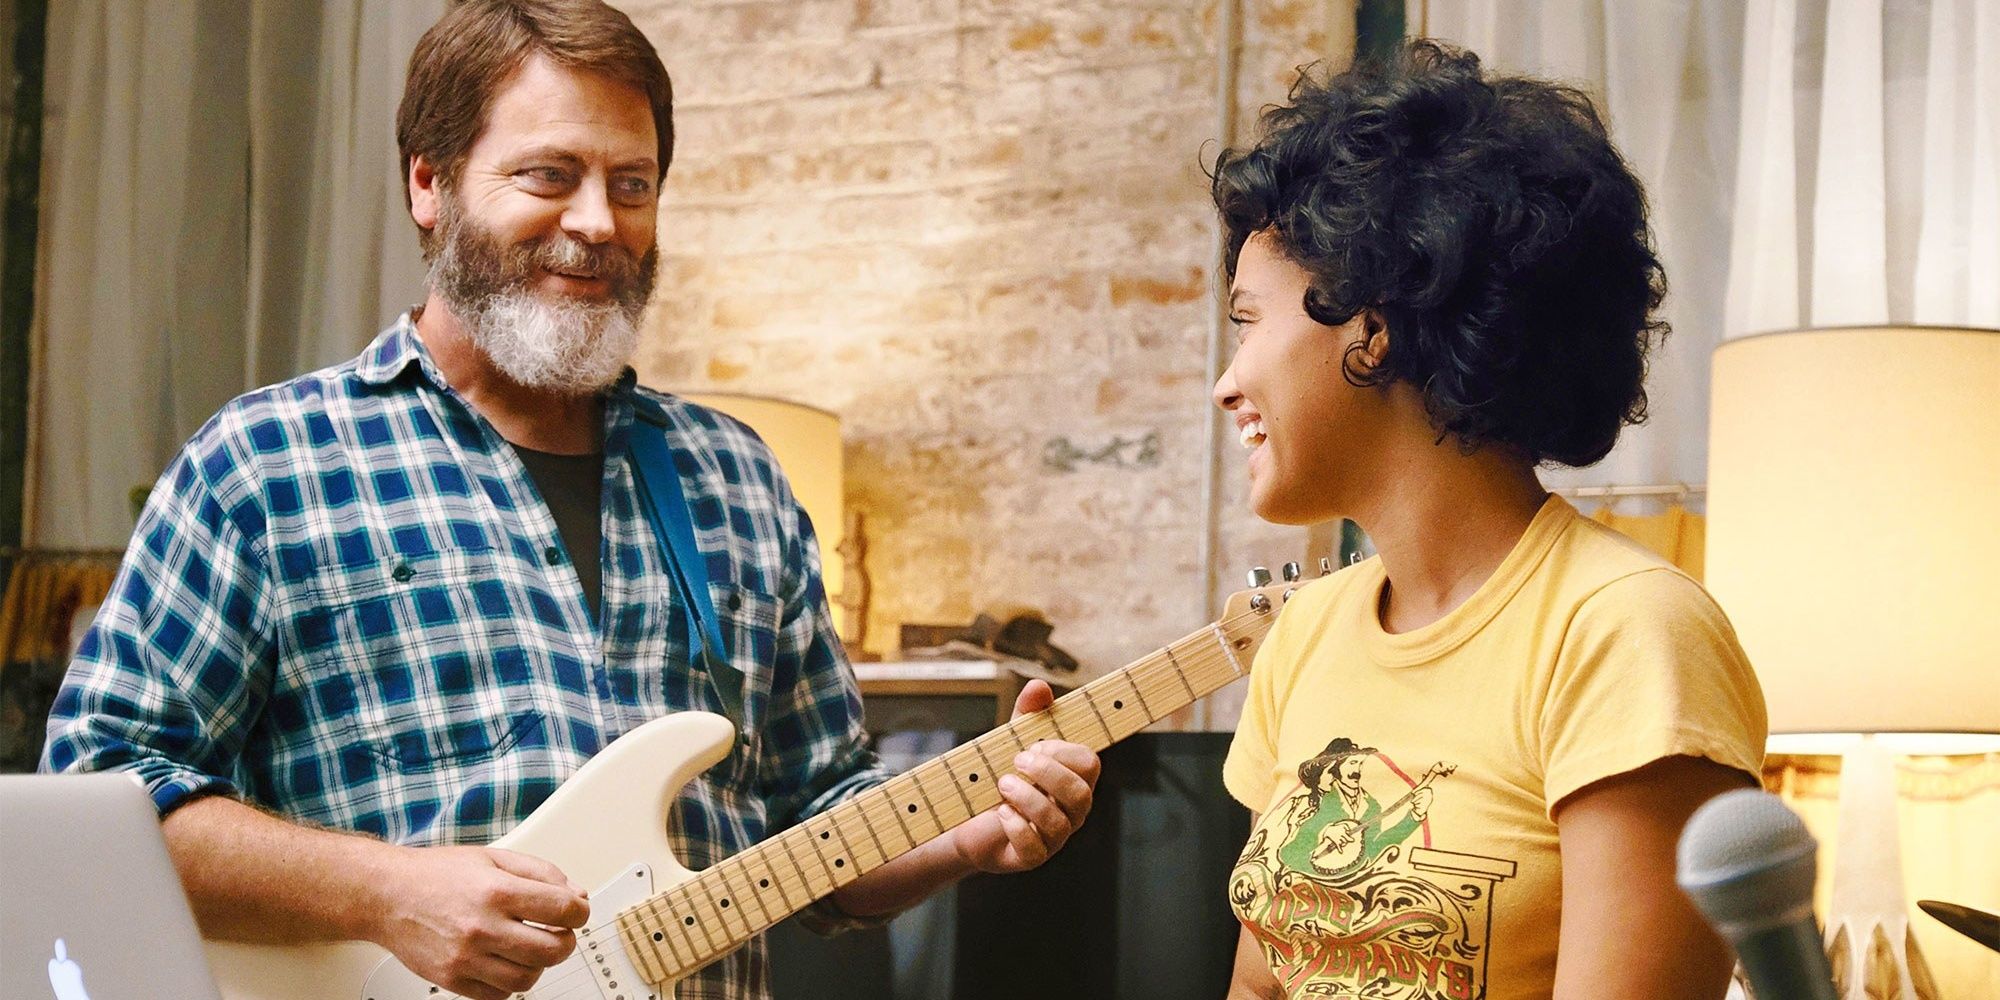 A still from Hearts Beat Loud